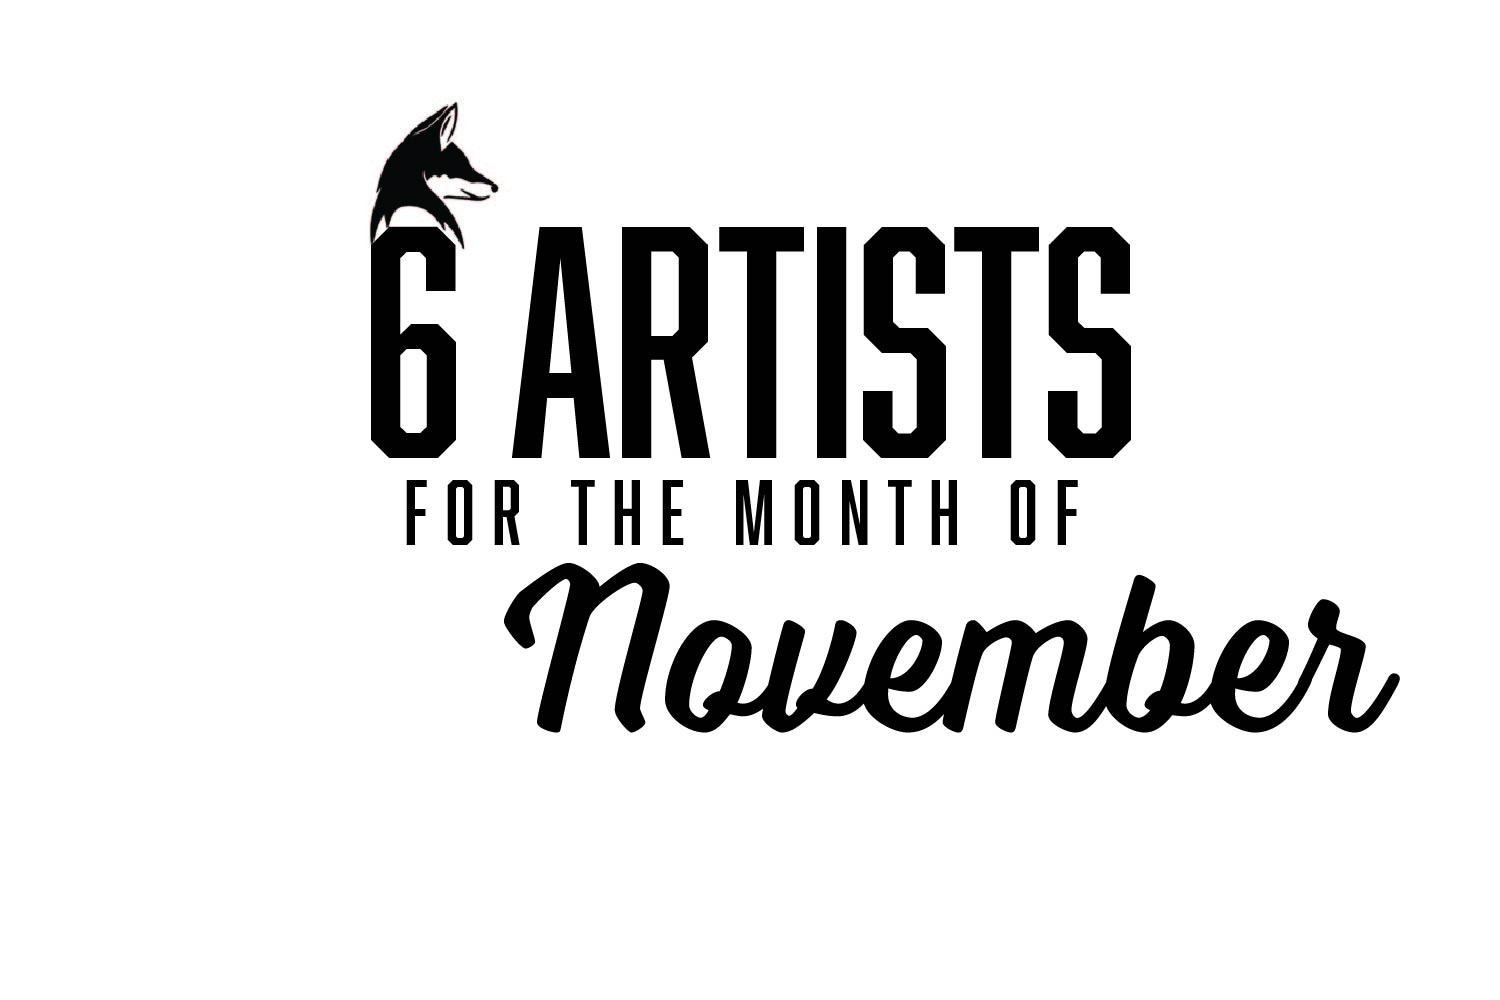 Six+Artists+You+Should+Be+Listening+To%3A+November+2020+EDITION